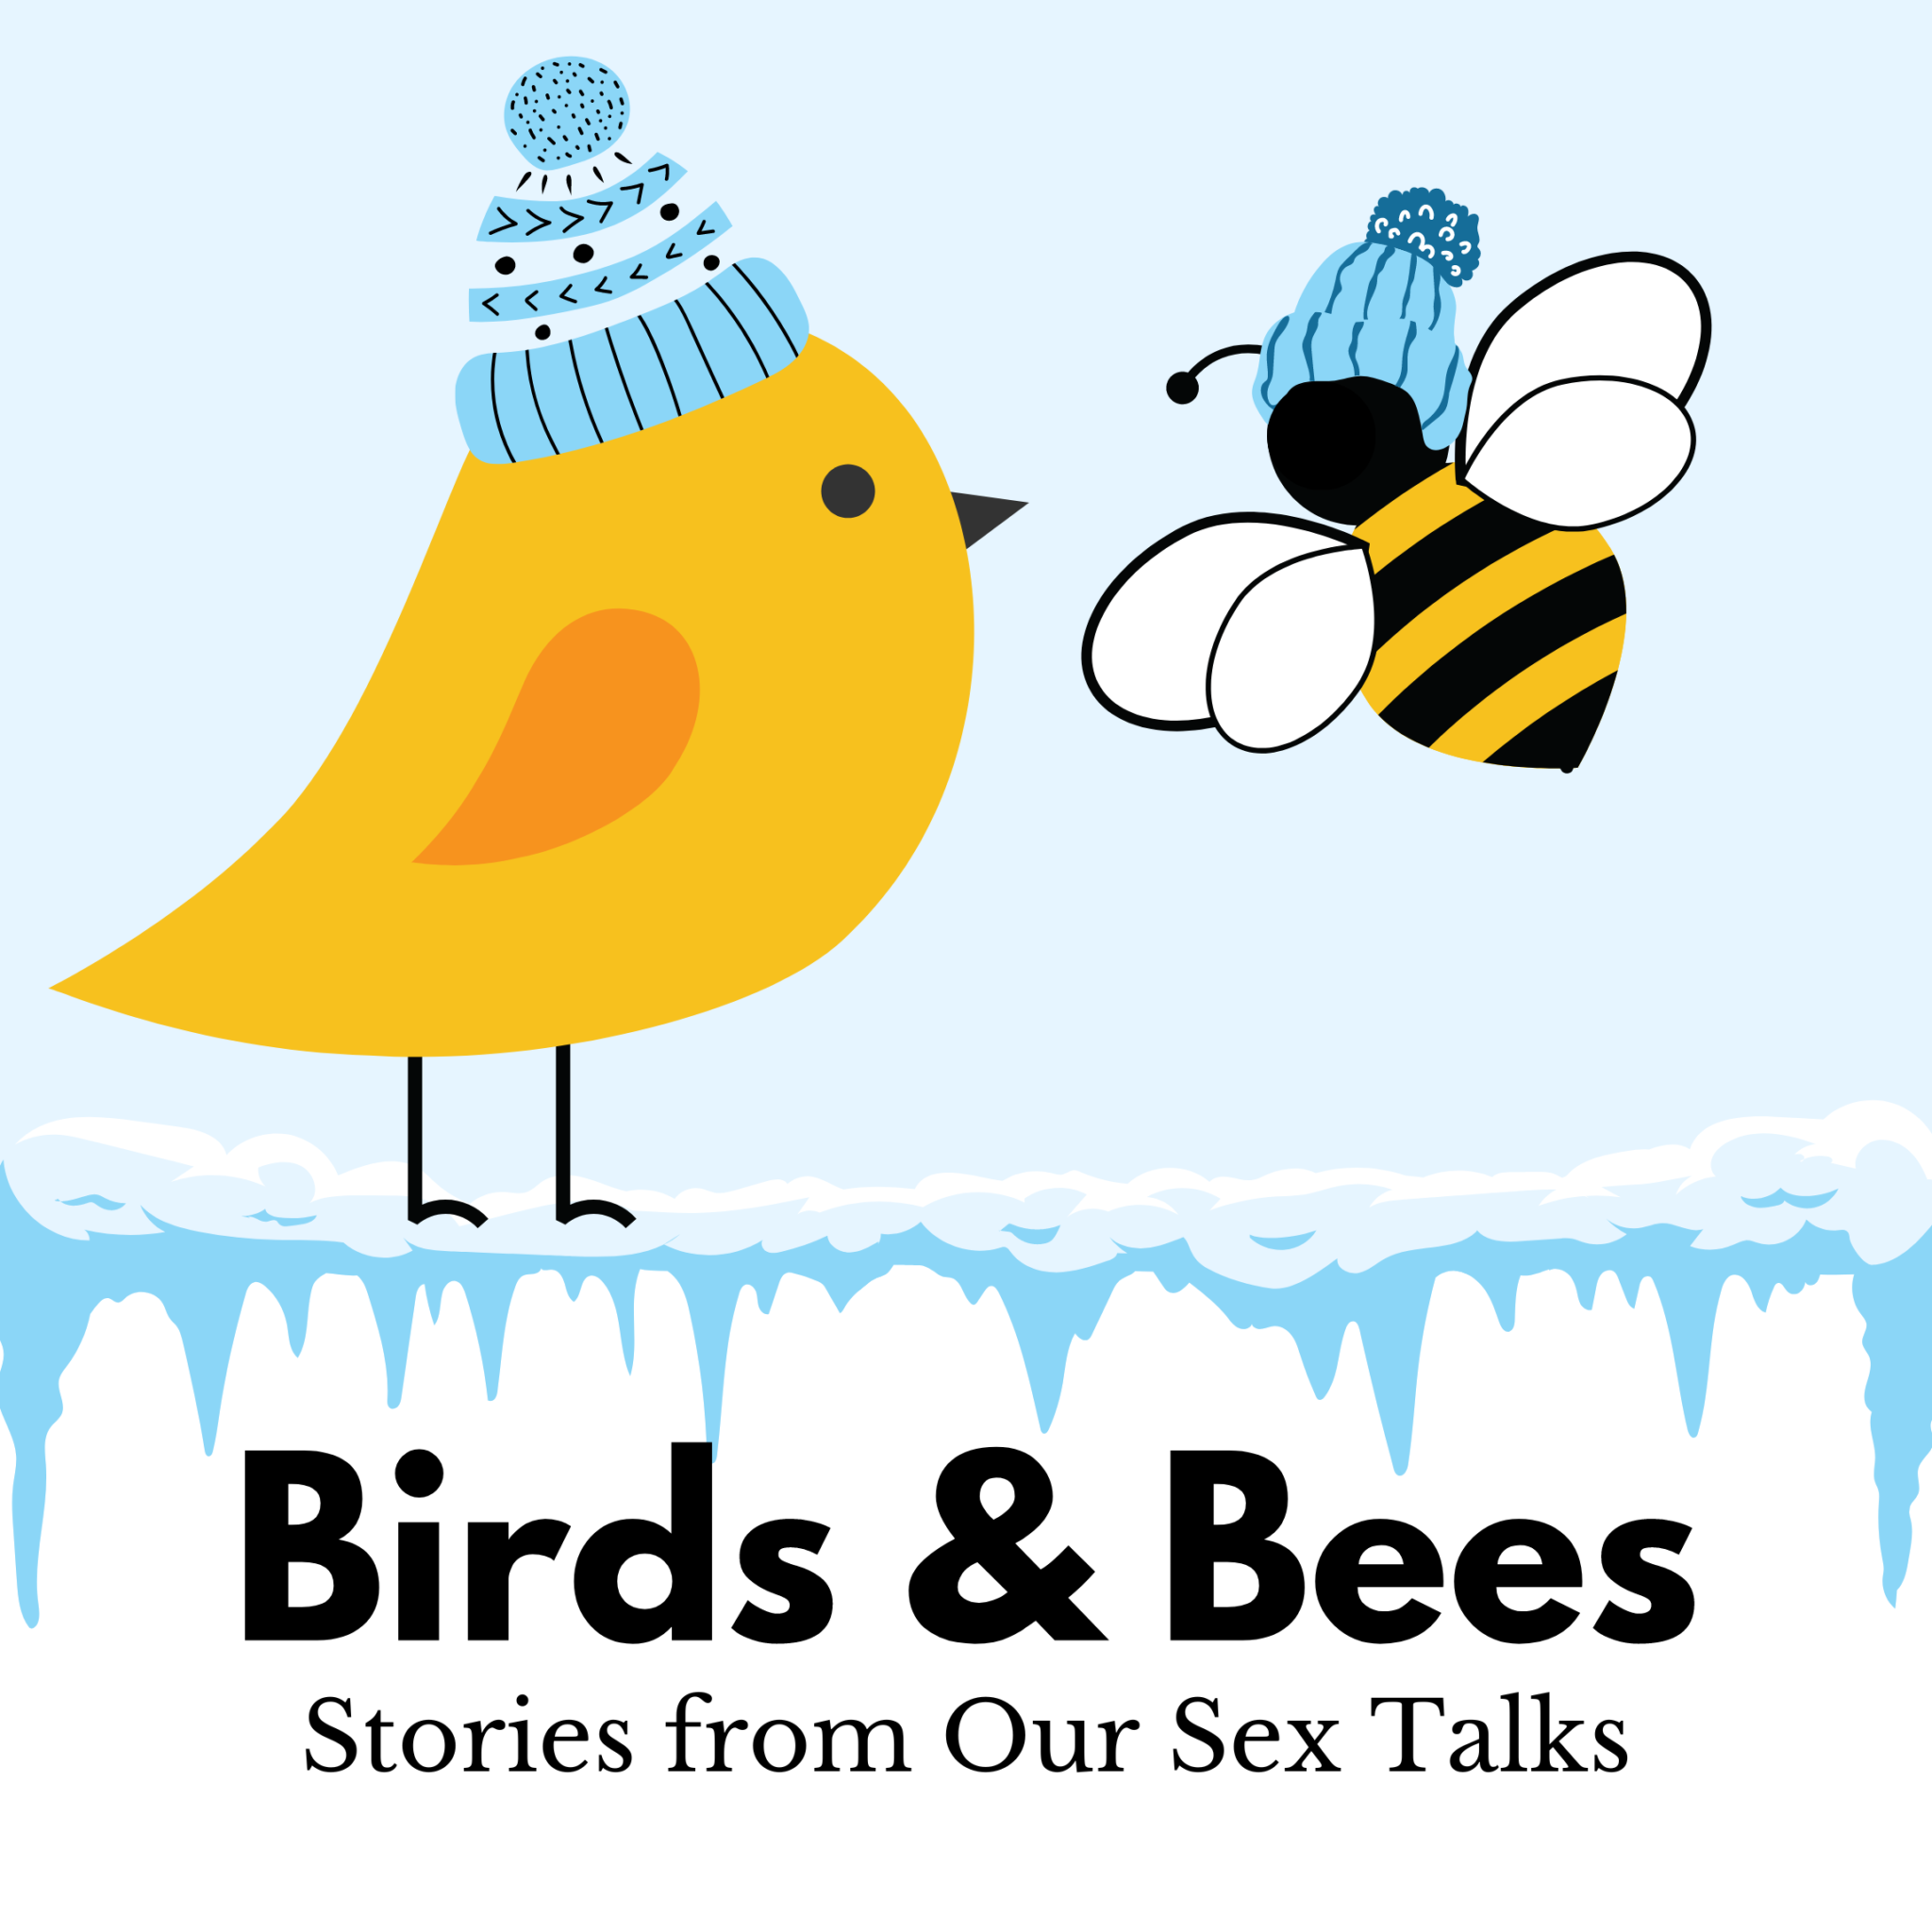 a graphic of a bird and a bee wearing winter hats